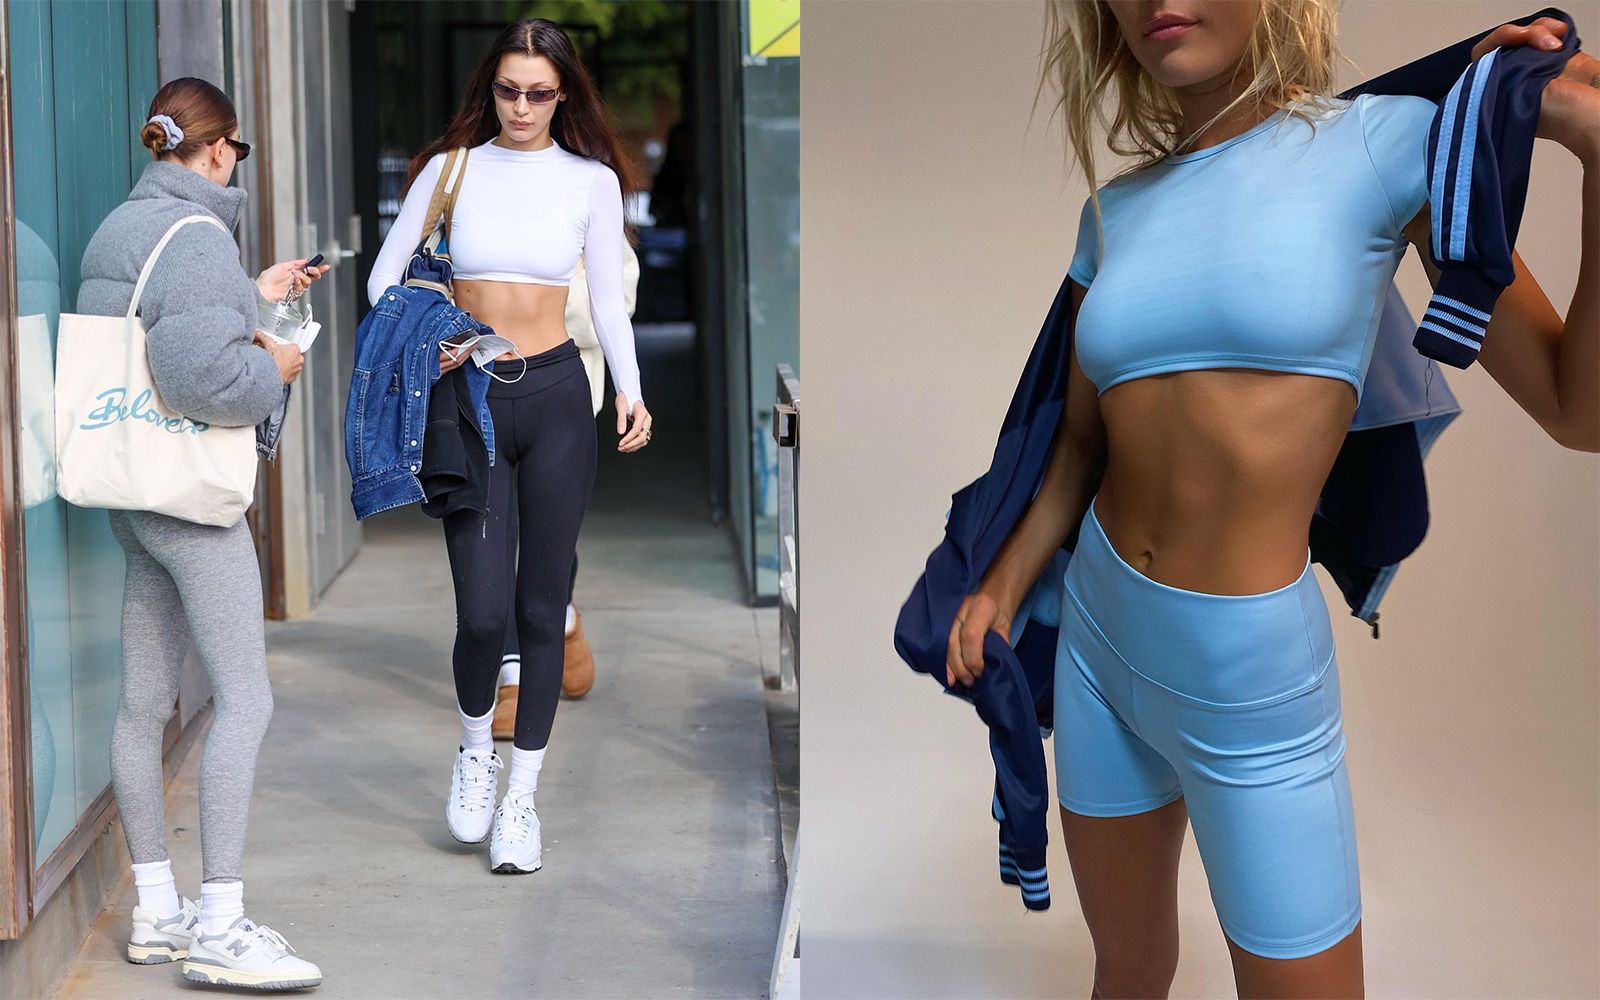 HAILEY BIEBER & BELLA HADID'S ATHLEISURE OUTFITS WERE A MIX OF HIGH-LOW  FASHION